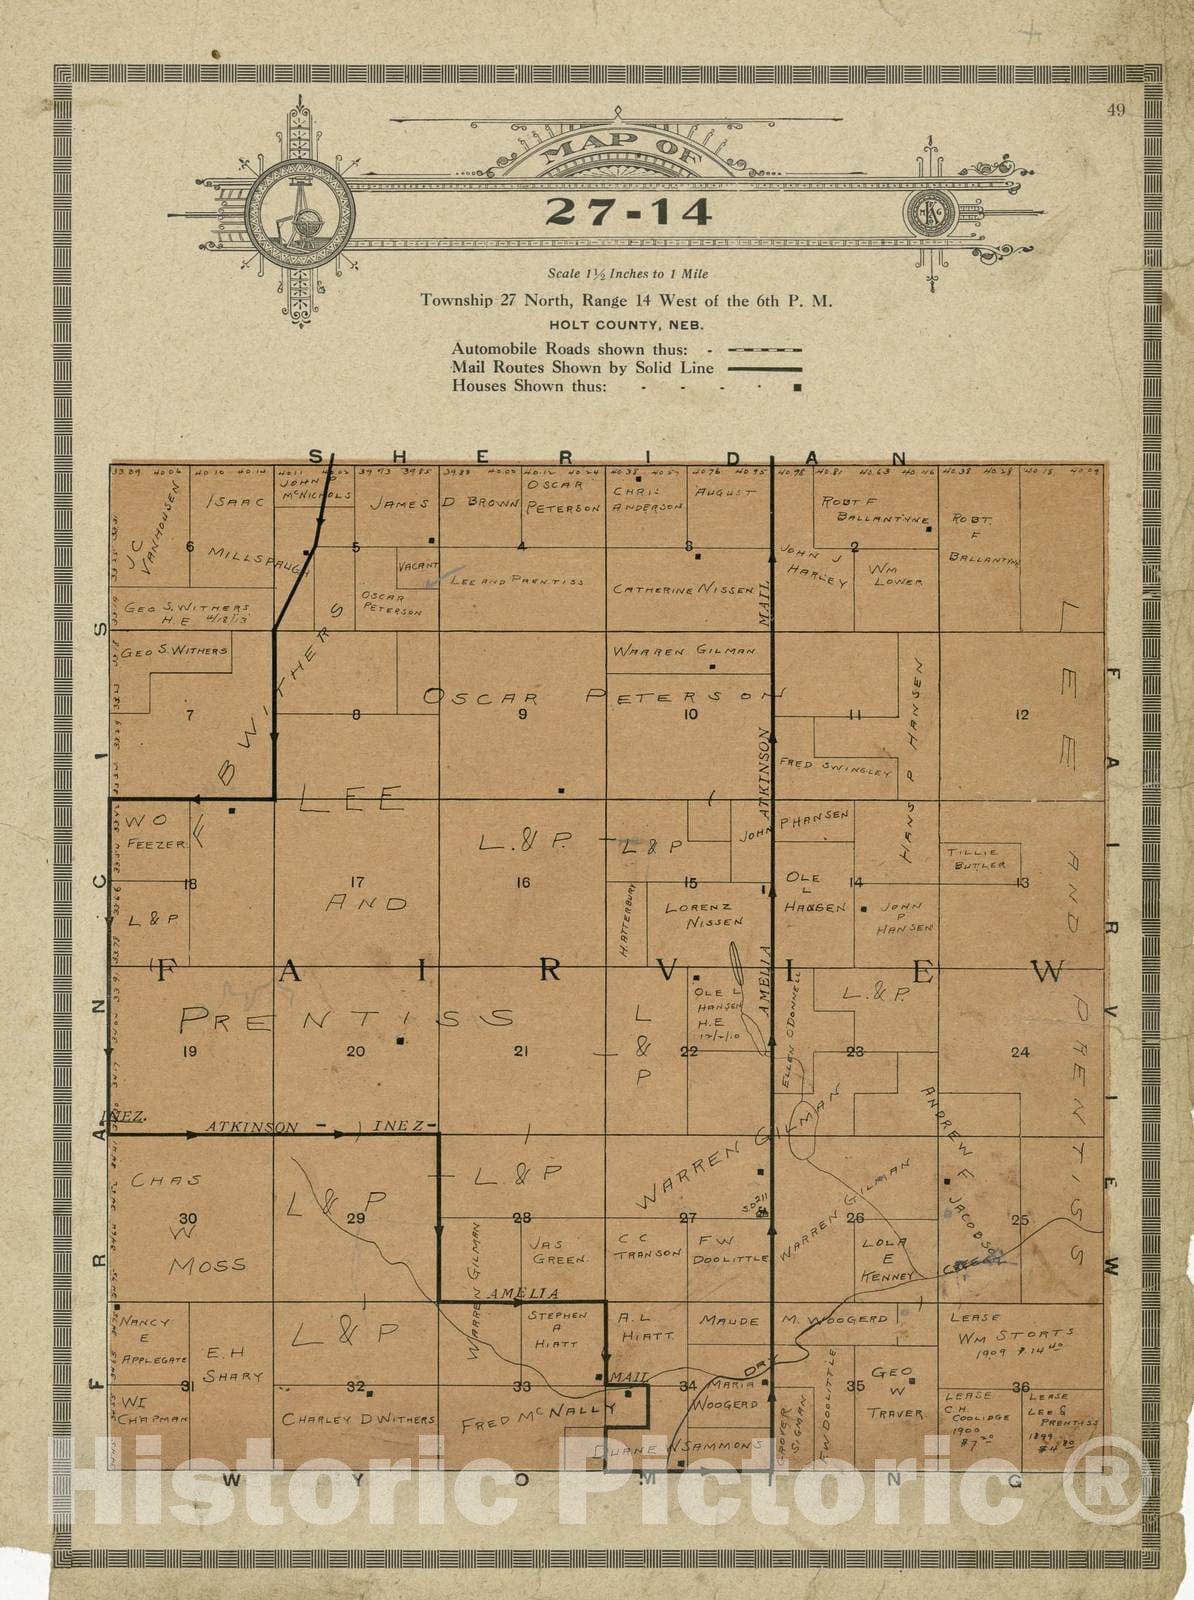 Historic 1915 Map - Atlas and plat Book of Holt County, Nebraska - Map of 27-14 - Standard Atlas and Directory of Holt County, Nebraska